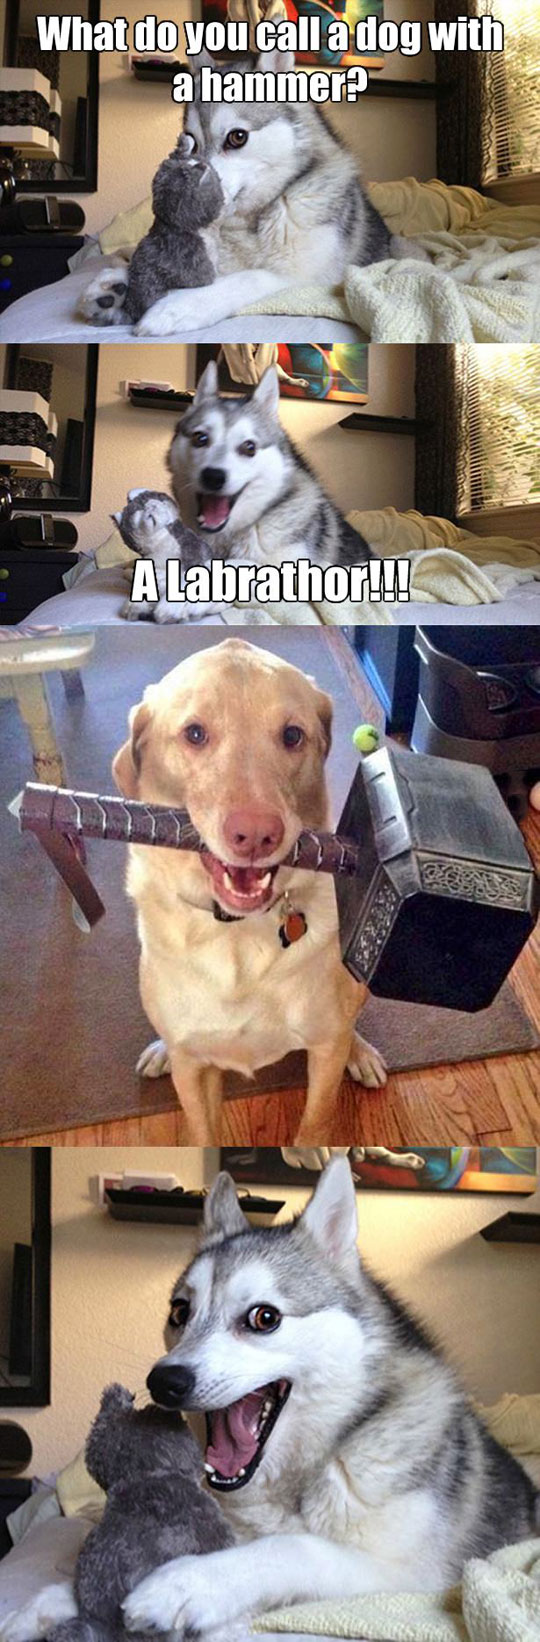 Dog+With+A+Hammer